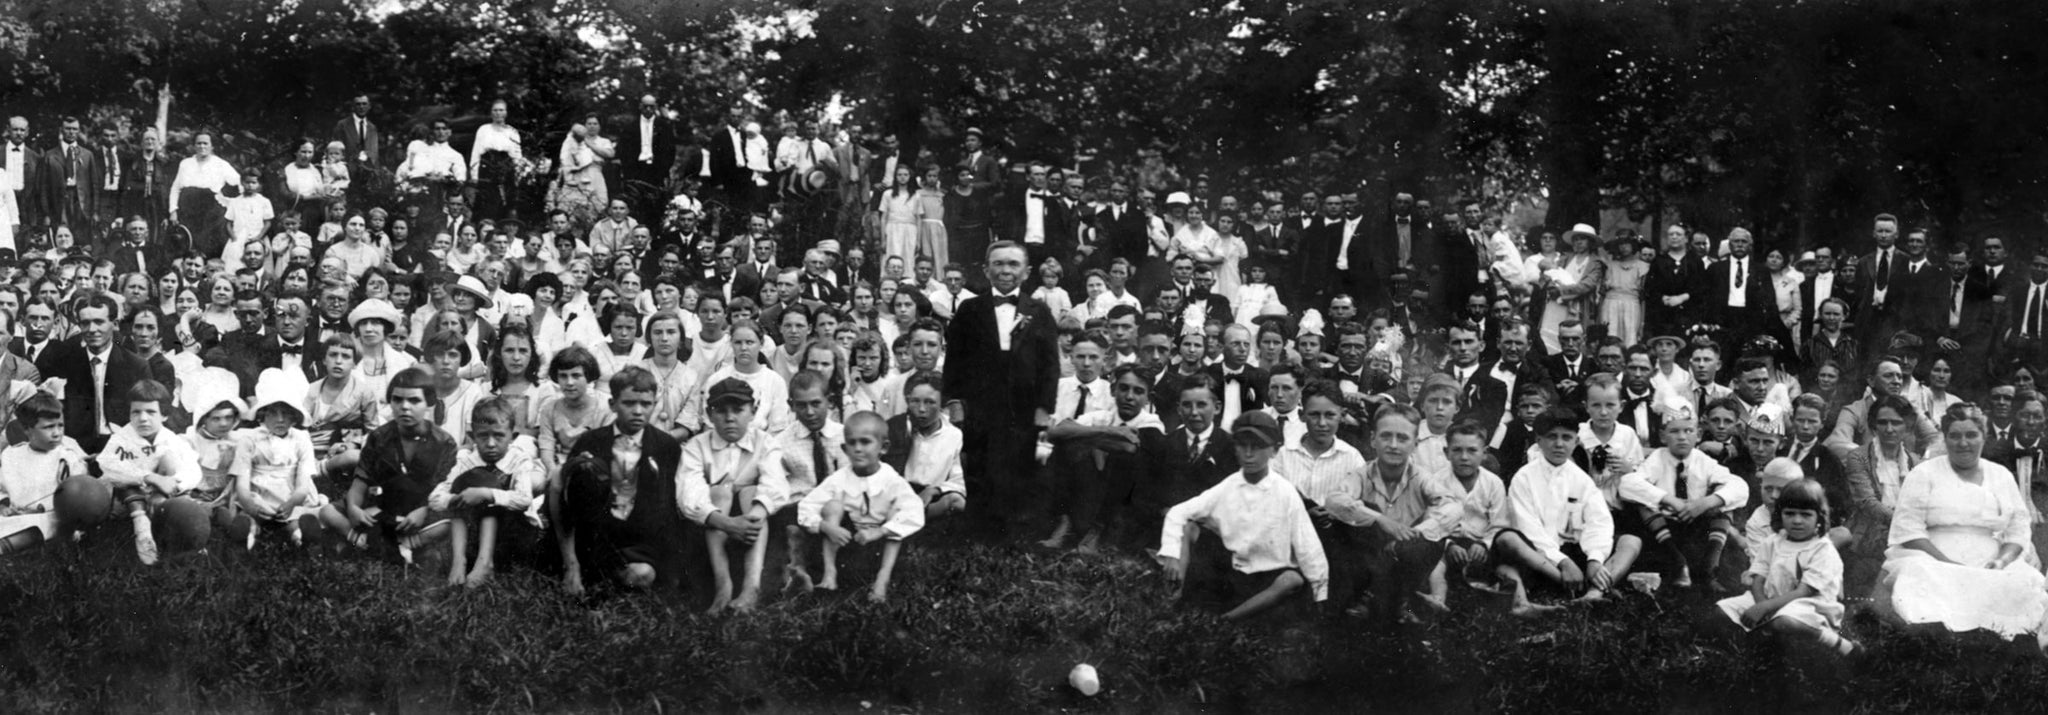 Gathering of the Kings Mountain Pythian Lodge No. 94 in 1921. The Guest of Honor (center) was the smallest Pythian, Major John Mertz, who stood 46 inches tall and weighed 62 pounds. -- Courtesy Kings Mountain Historical Museum